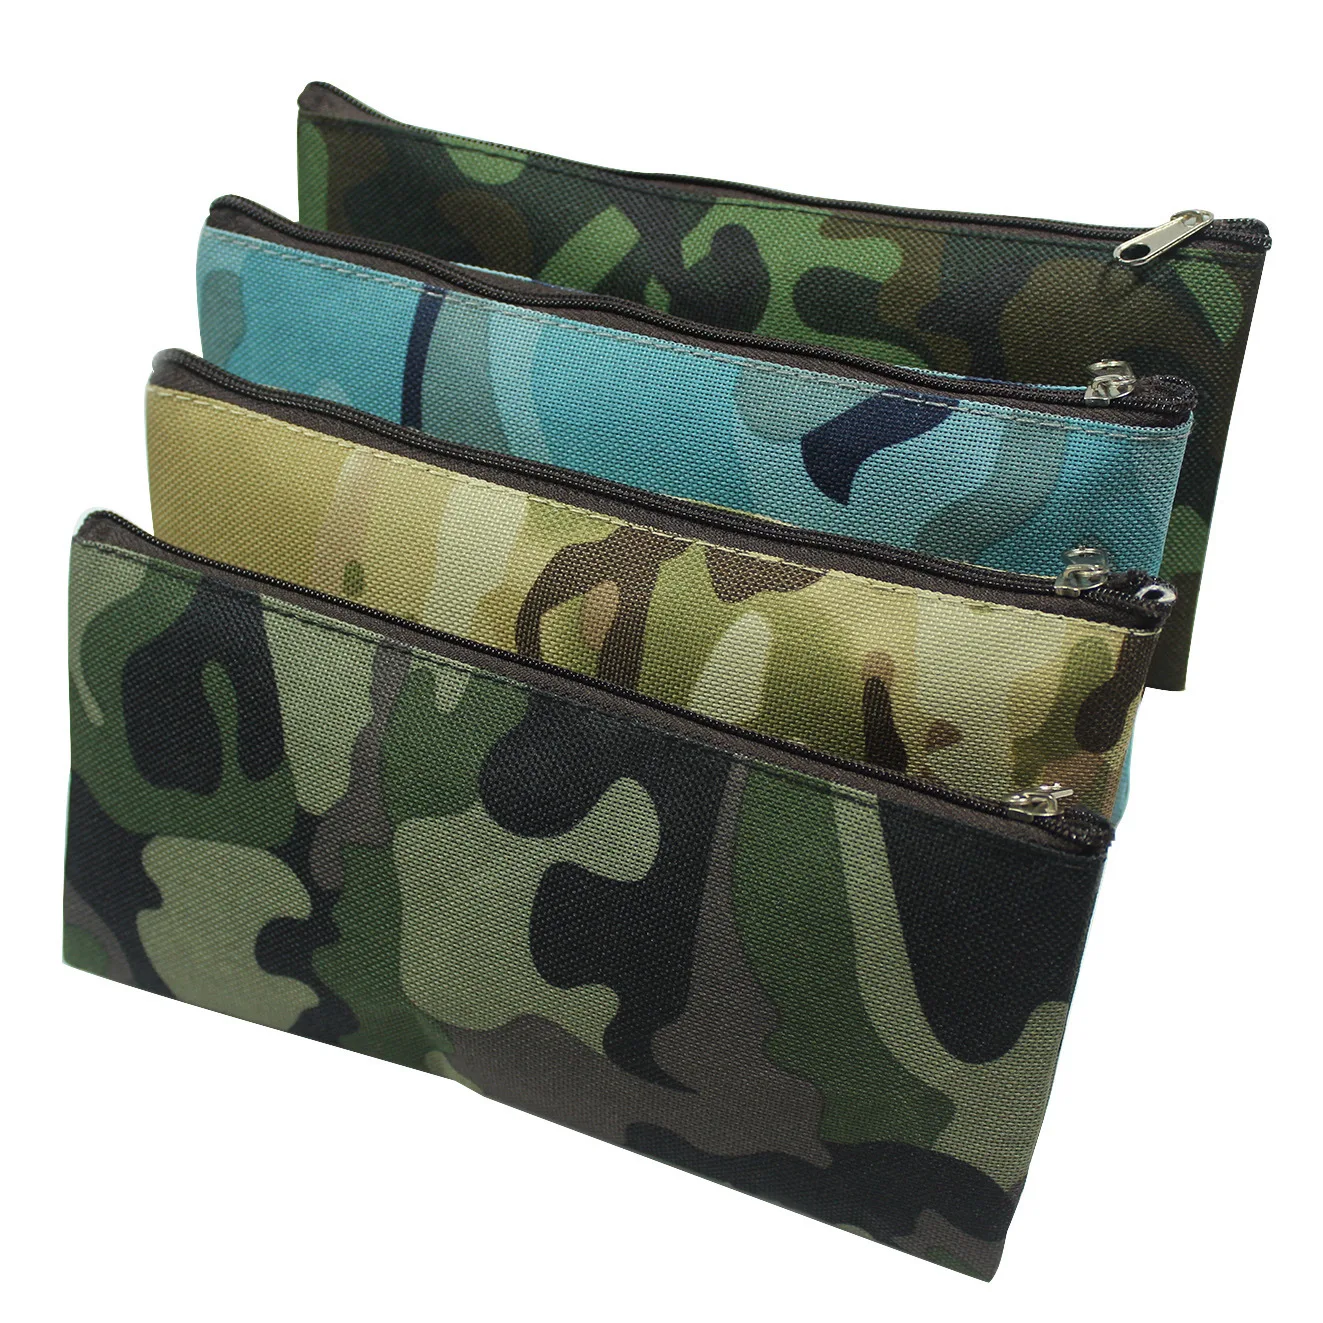 Camouflage Pencil Case Pencil Bag for Boys and Girls School Supplies Cosmetic Makeup Bags Zipper Pouch Purse 4 Colors images - 6